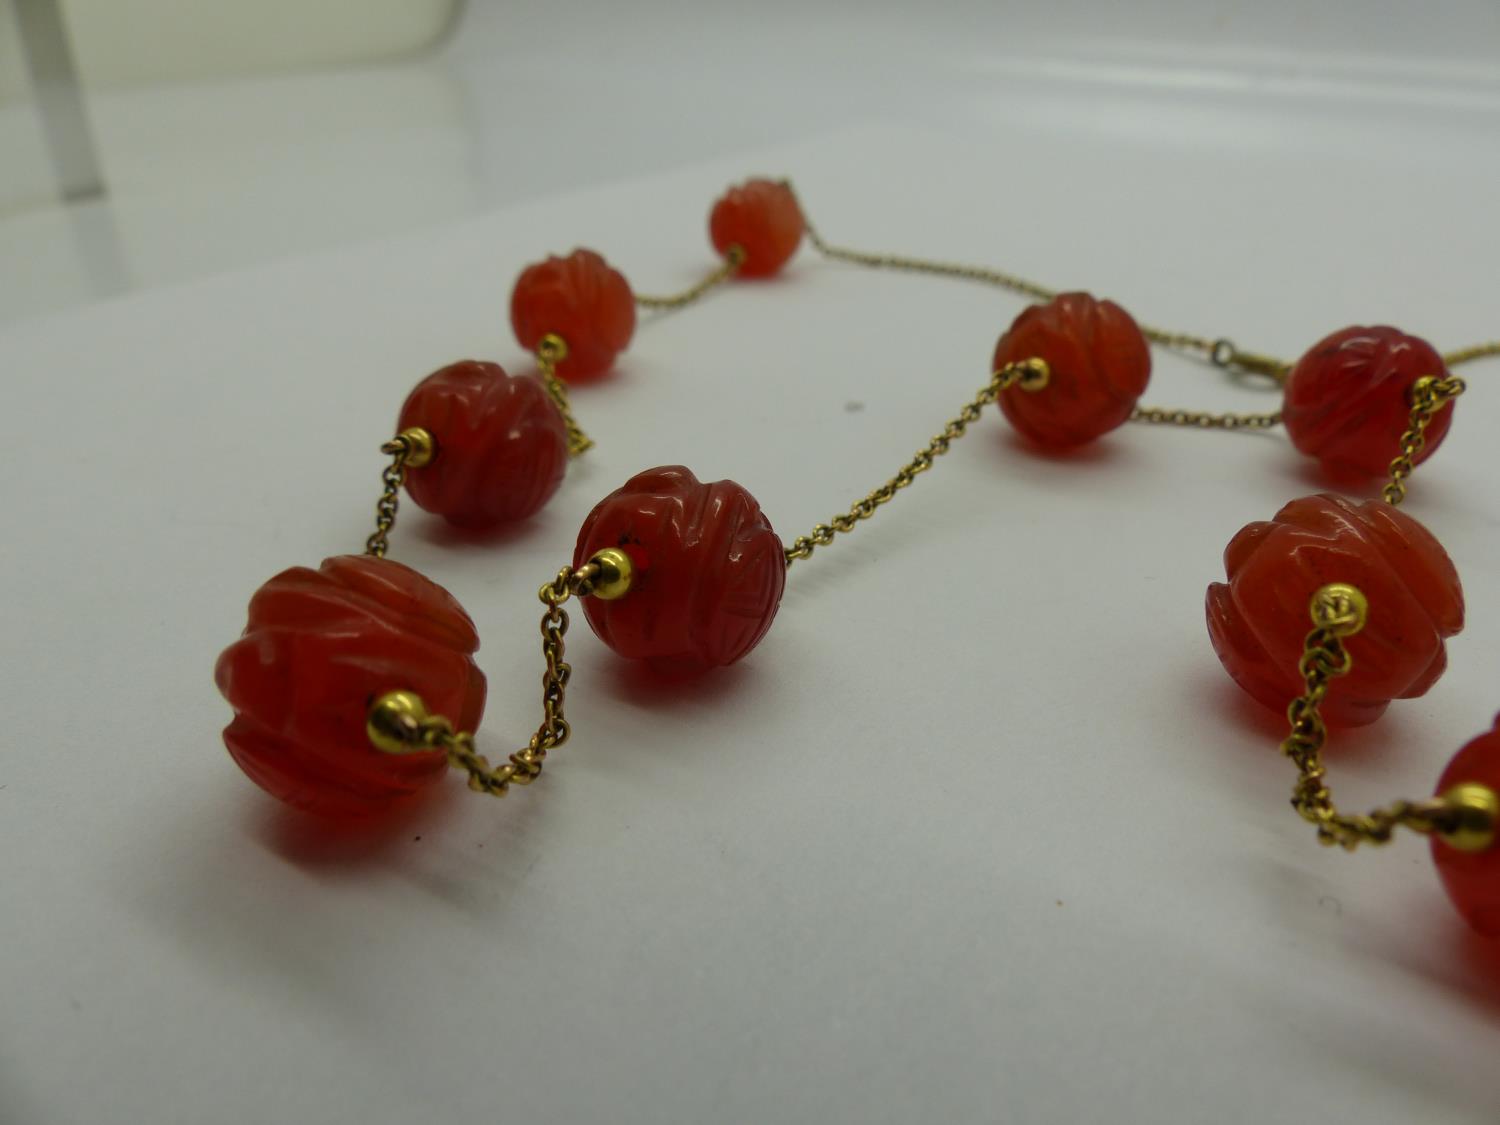 Unusual 19th century unmarked gold necklace, set with eleven carved carnelian beads, L: 63 cm. UK - Image 2 of 2